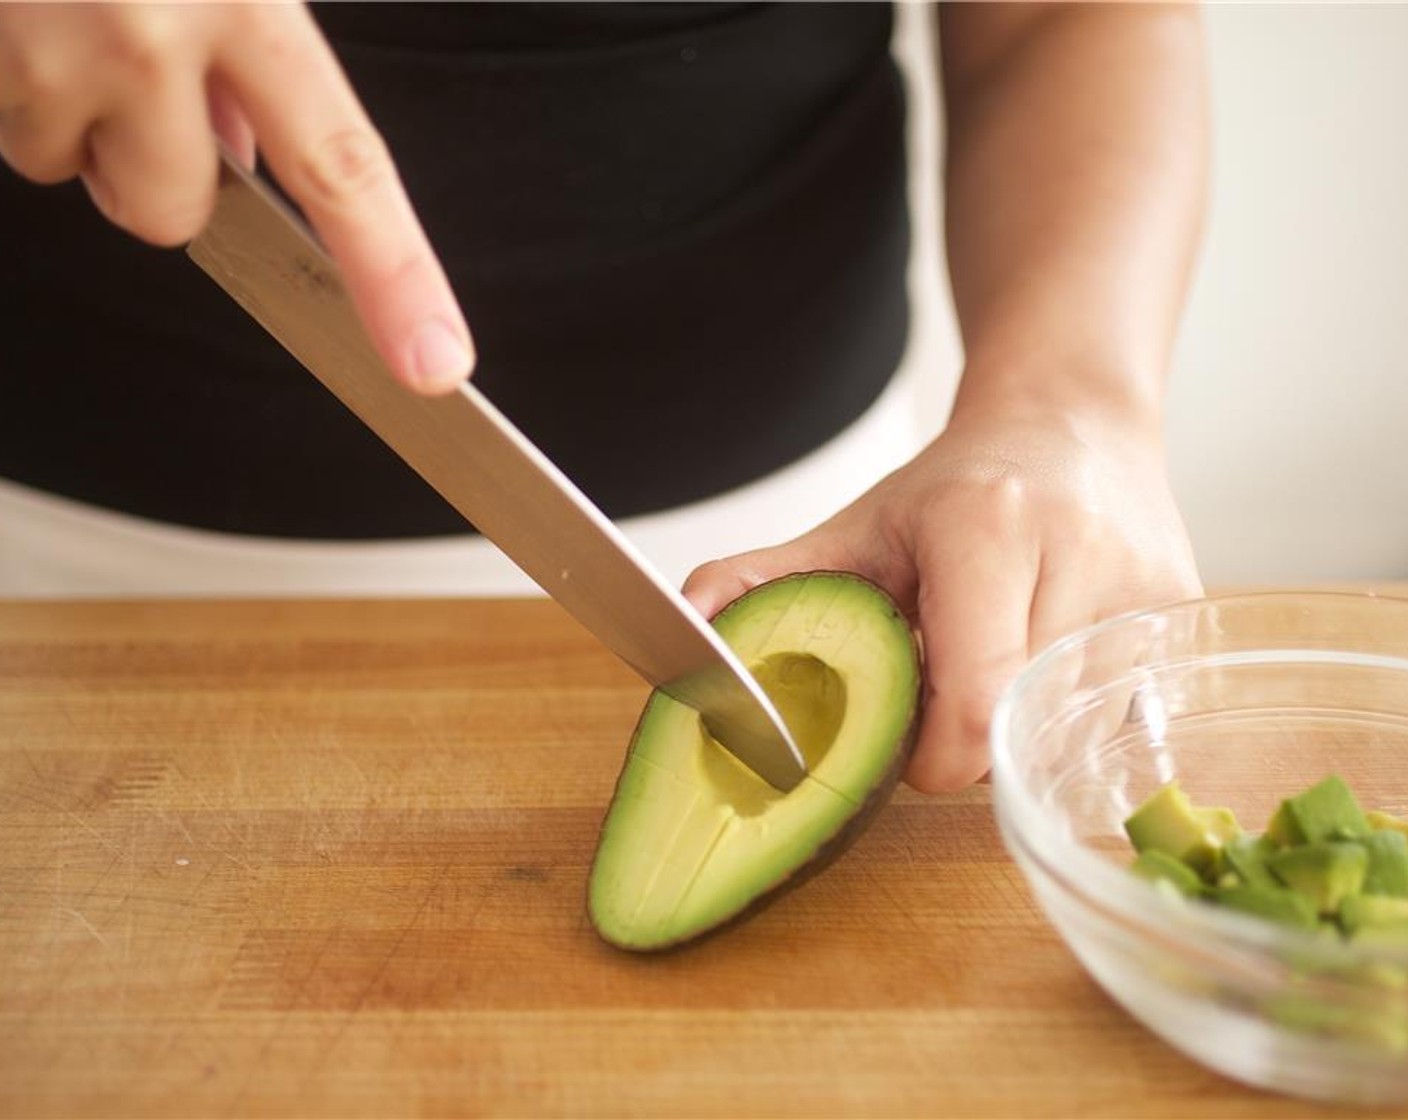 step 3 Slice through the Avocado (1) lengthwise around the pit and twist the two halves apart. Remove the pit by carefully whacking your knife into it and then twist the knife to pull out the pit.